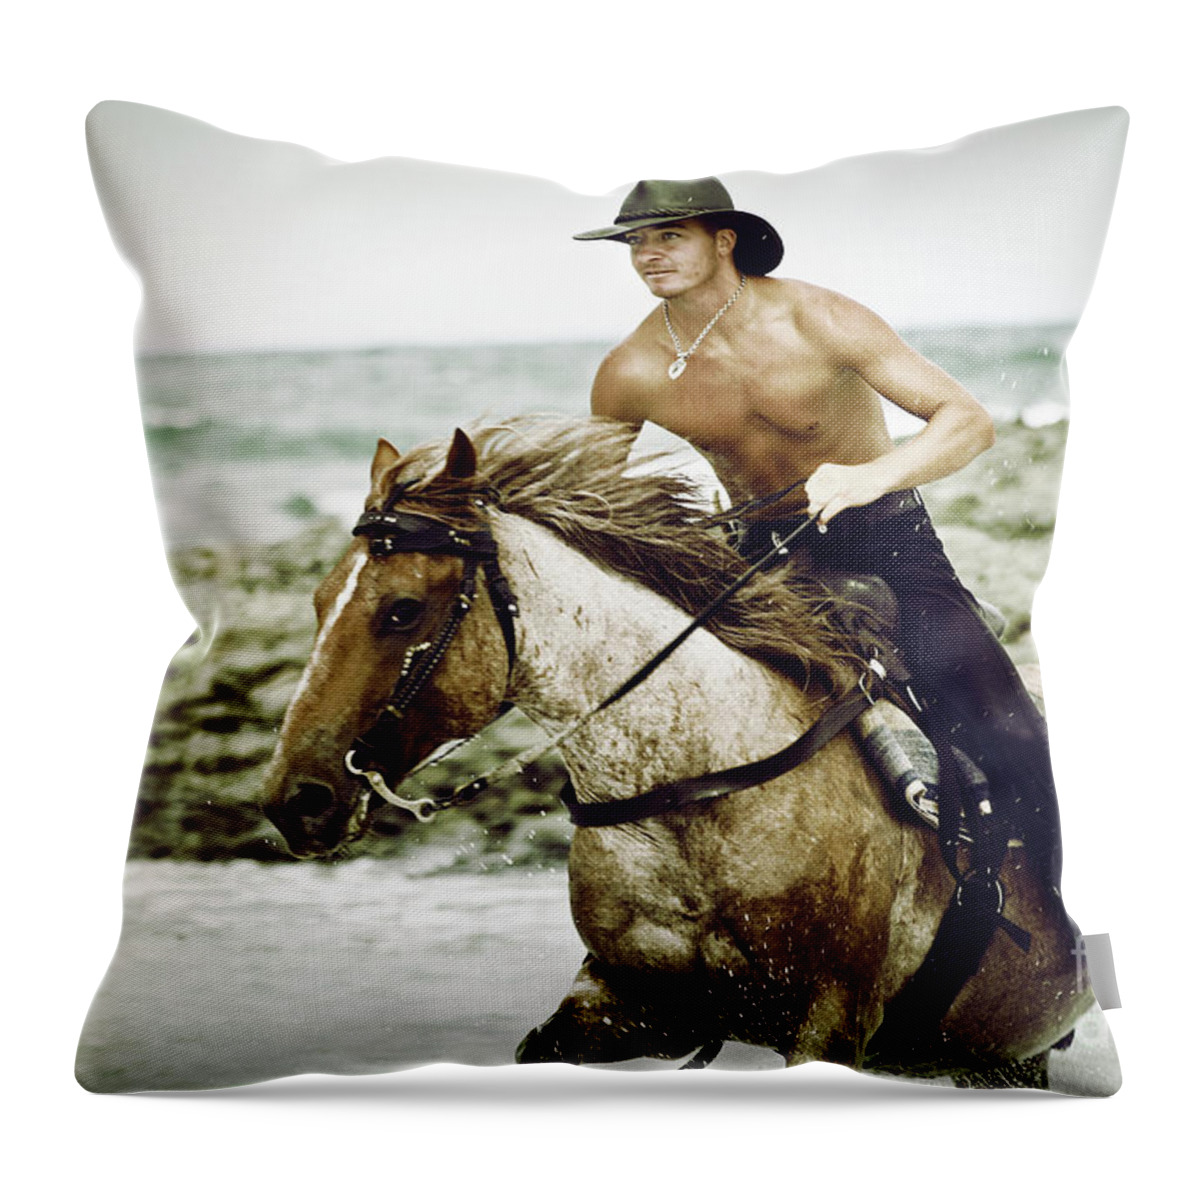 Horse Throw Pillow featuring the photograph Cowboy riding horse on the beach by Dimitar Hristov